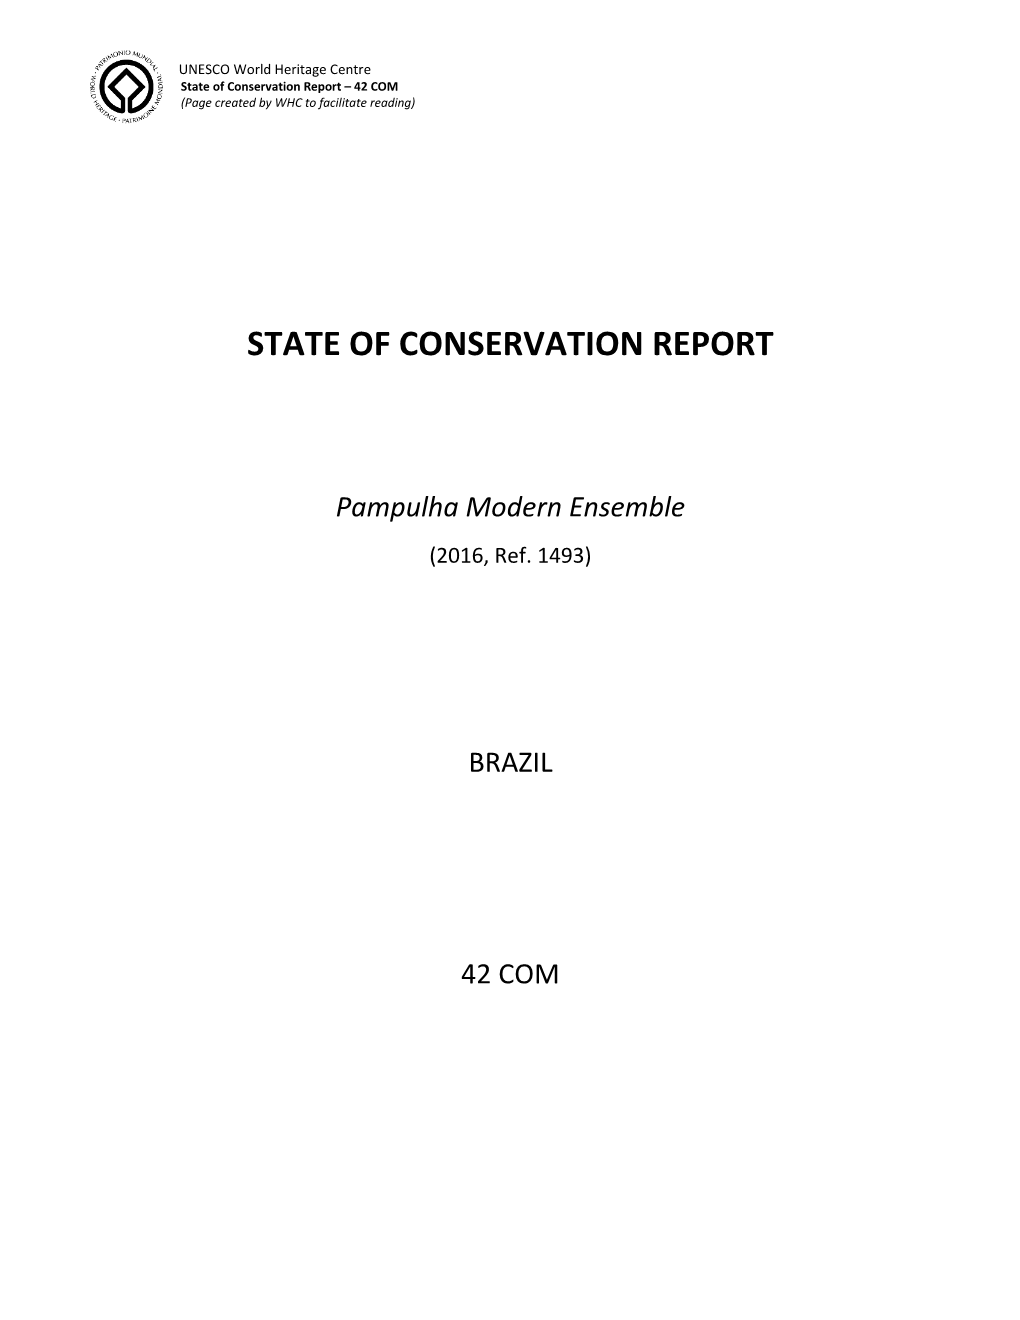 State of Conservation Report – 42 COM (Page Created by WHC to Facilitate Reading)